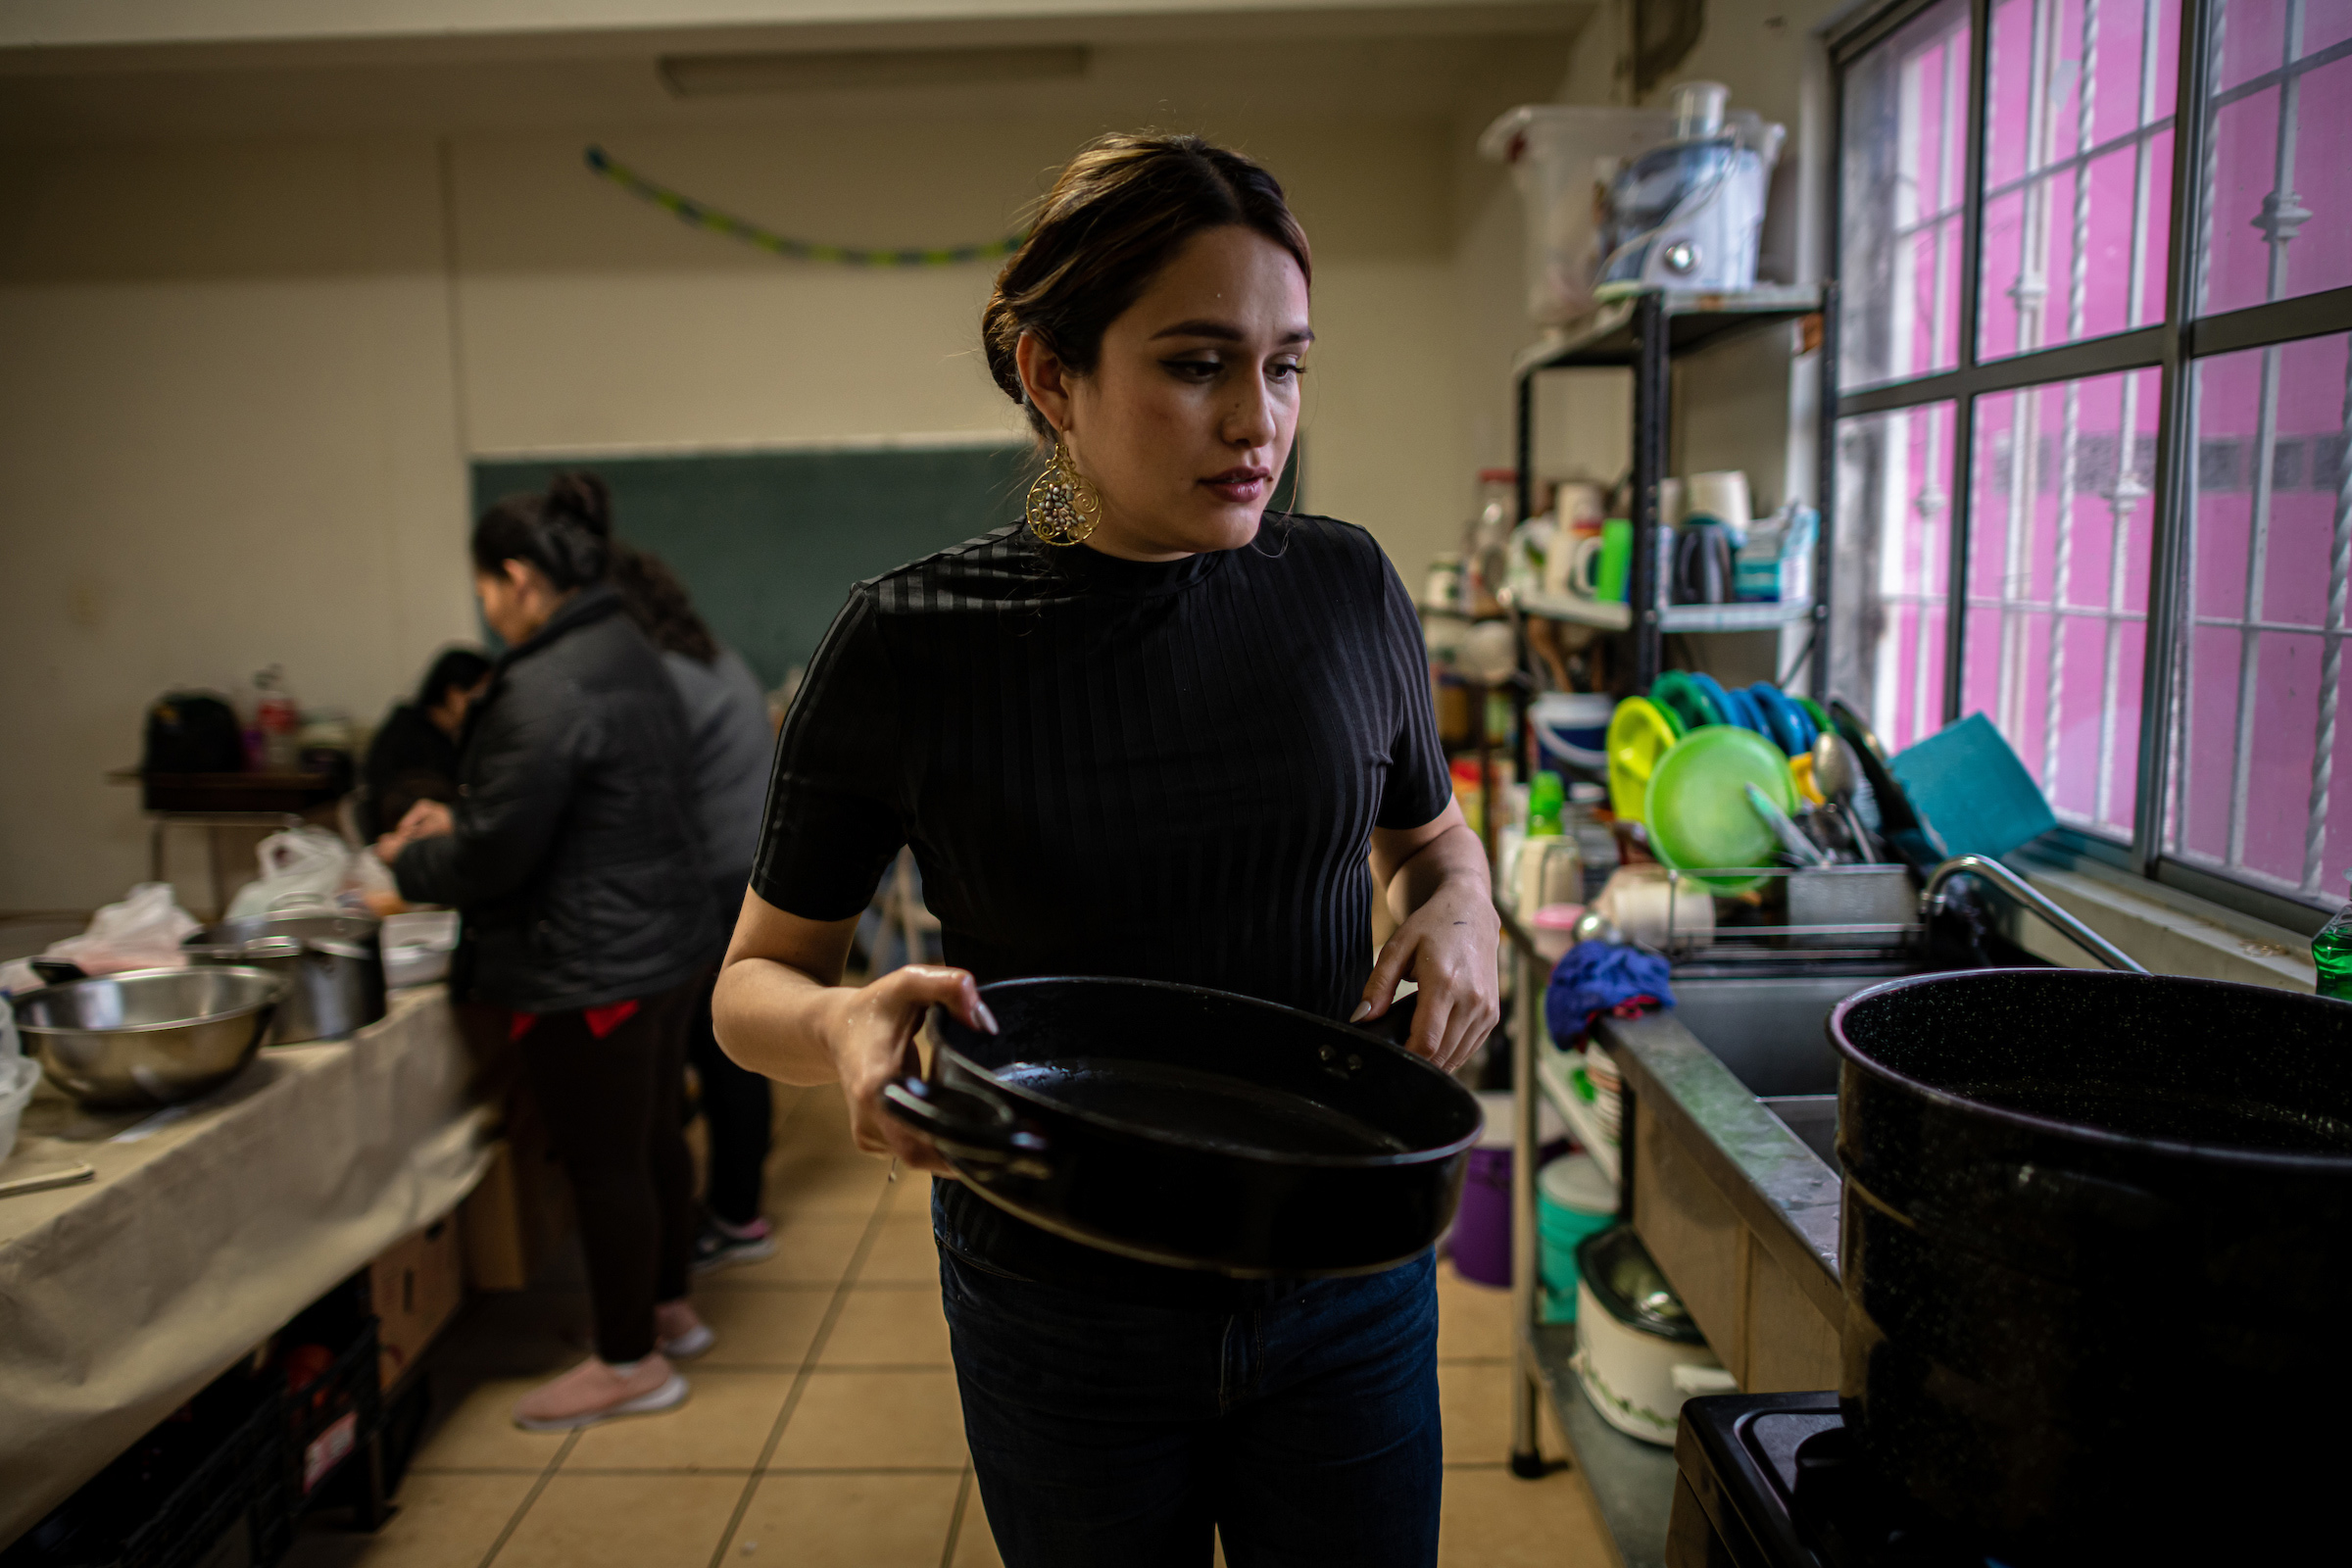 Shelter coordinator Karina Breceda cooks soup with migrant women in the kitchen. “When I see my team, they’re basically on call 24/7,” Breceda says. “There’s a lot of peace, and a lot of healing with the work that they’re doing." (Meridith Kohut for TIME)